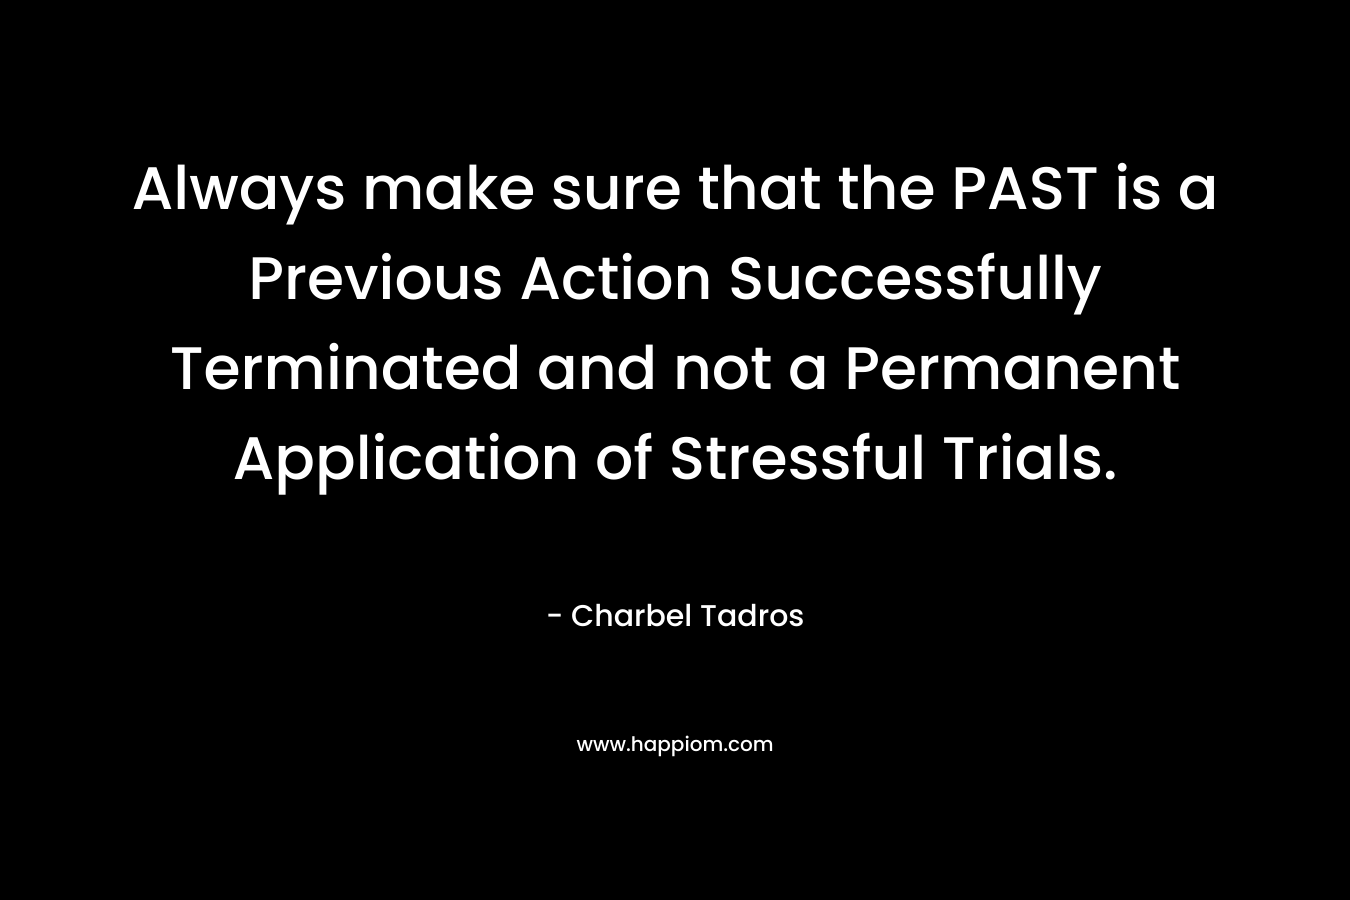 Always make sure that the PAST is a Previous Action Successfully Terminated and not a Permanent Application of Stressful Trials. – Charbel Tadros